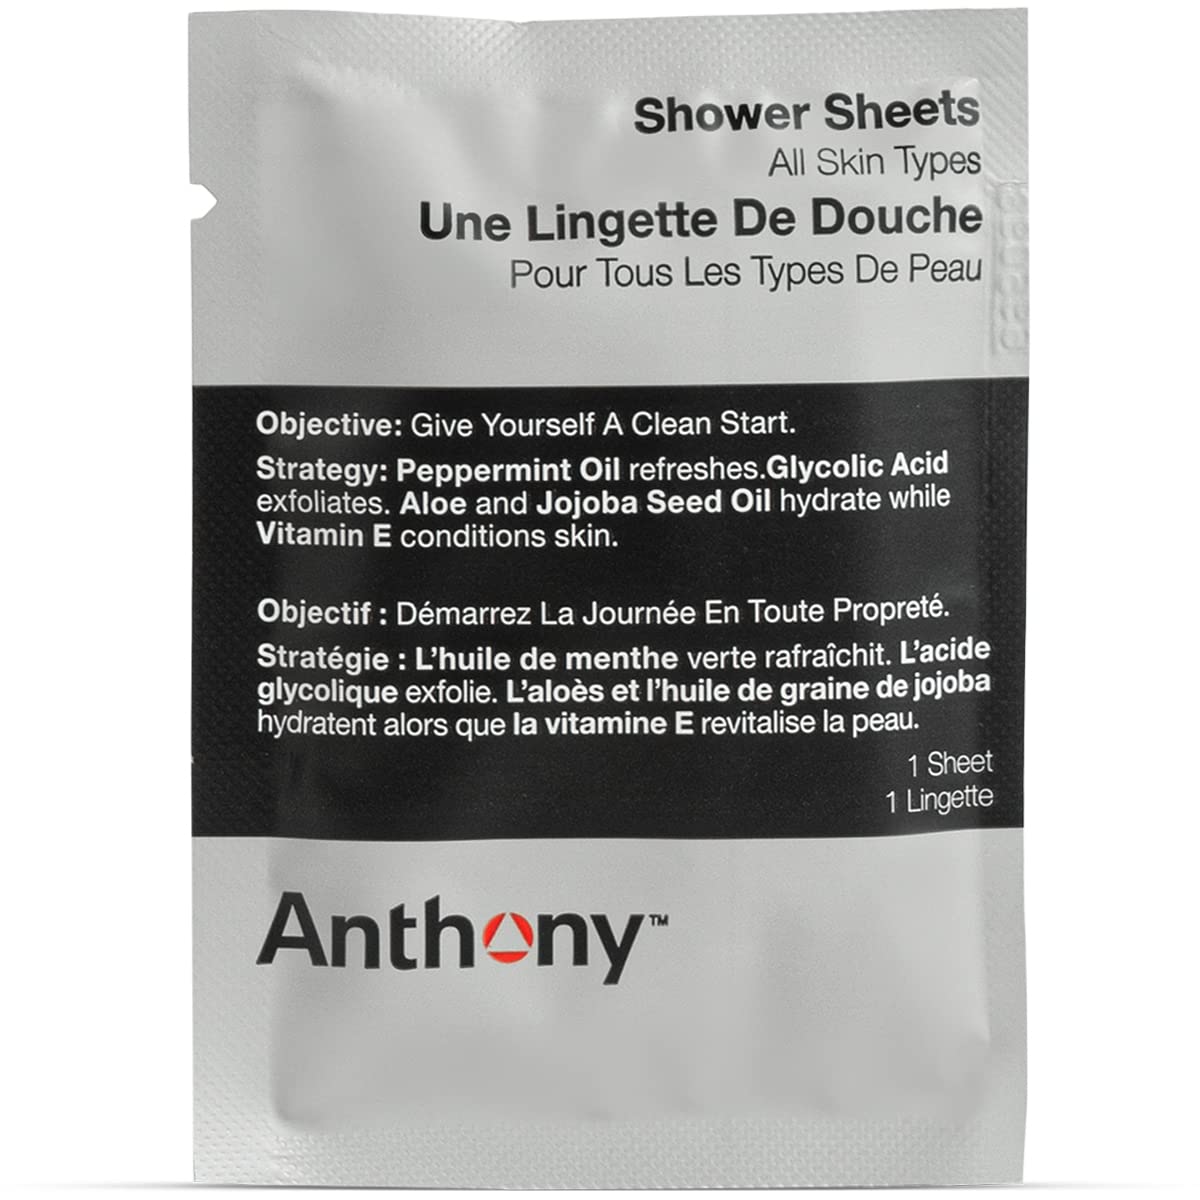 Anthony Body Wipes for Adults Bathing, Post Workout, & A Must Have Camping Personal Care Product – Travel Shower Wipes No Rinse Body Wash – Disposable Wash Cloth Towelettes 12 9”x12.5”